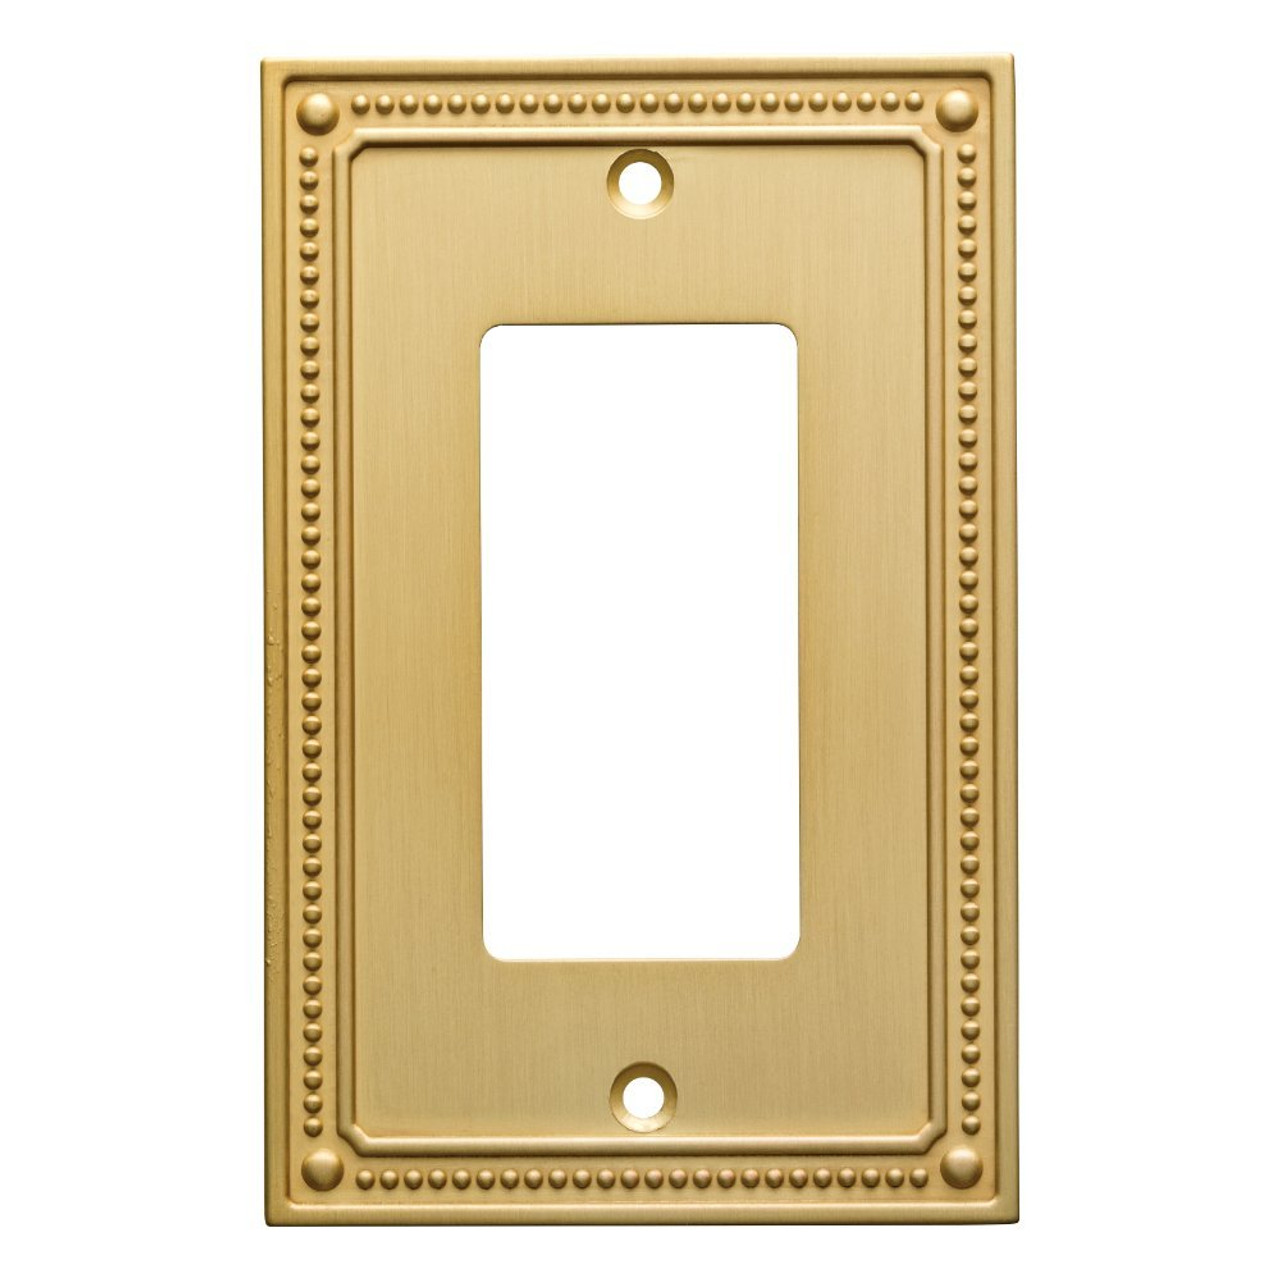 Franklin Brass W35060-BB Brushed Brass Classic Beaded Single GFCI Cover Plate